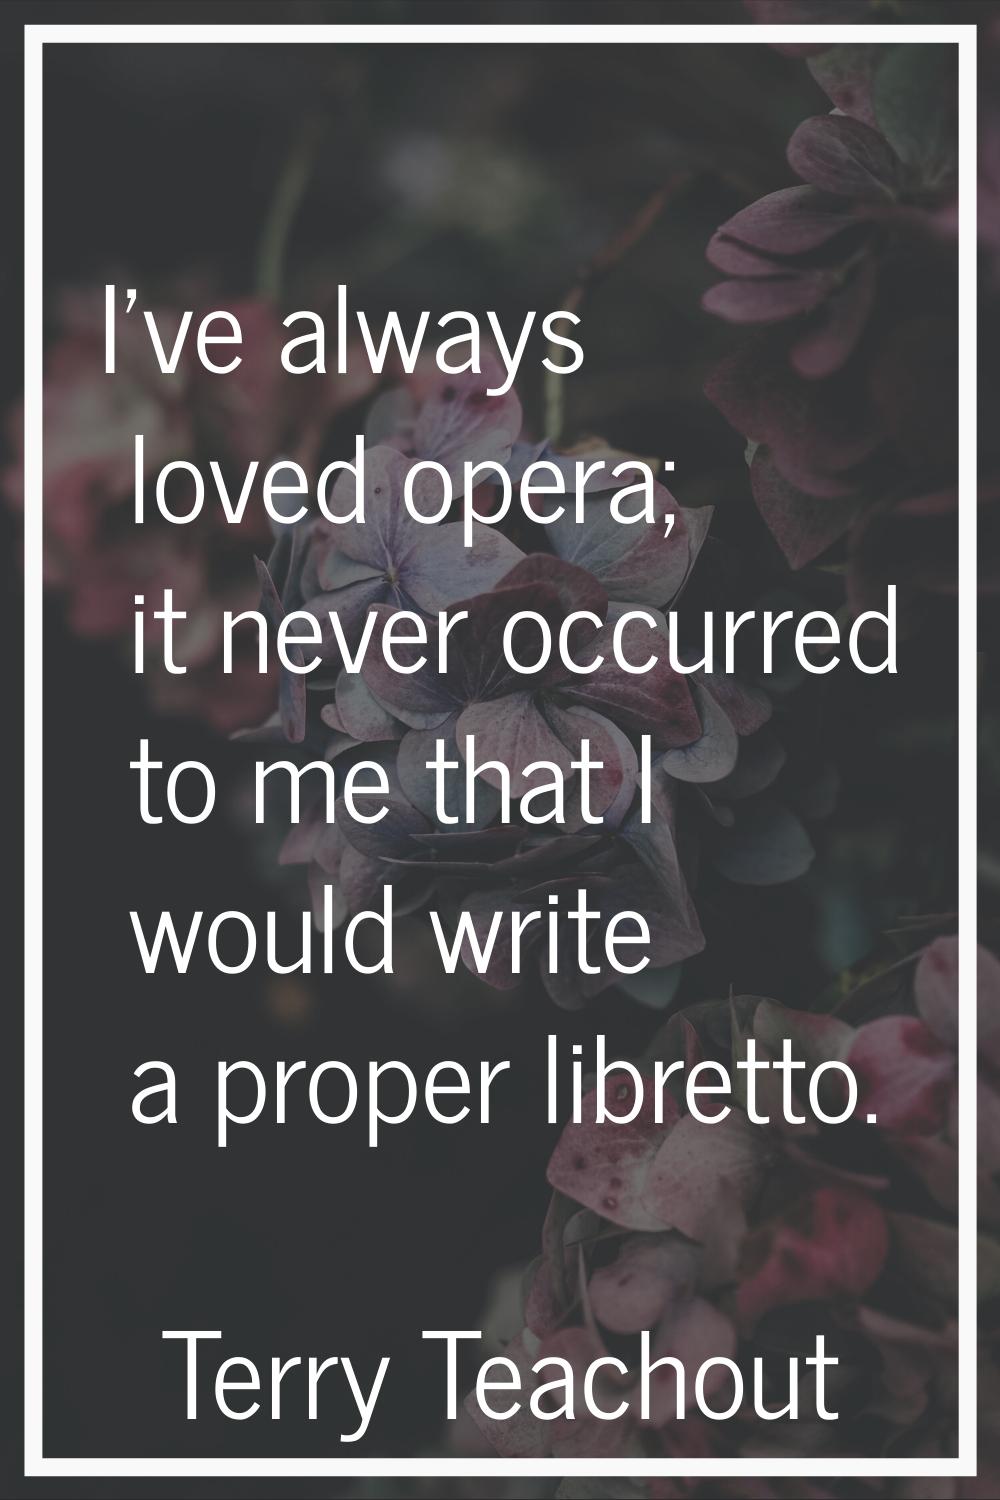 I've always loved opera; it never occurred to me that I would write a proper libretto.